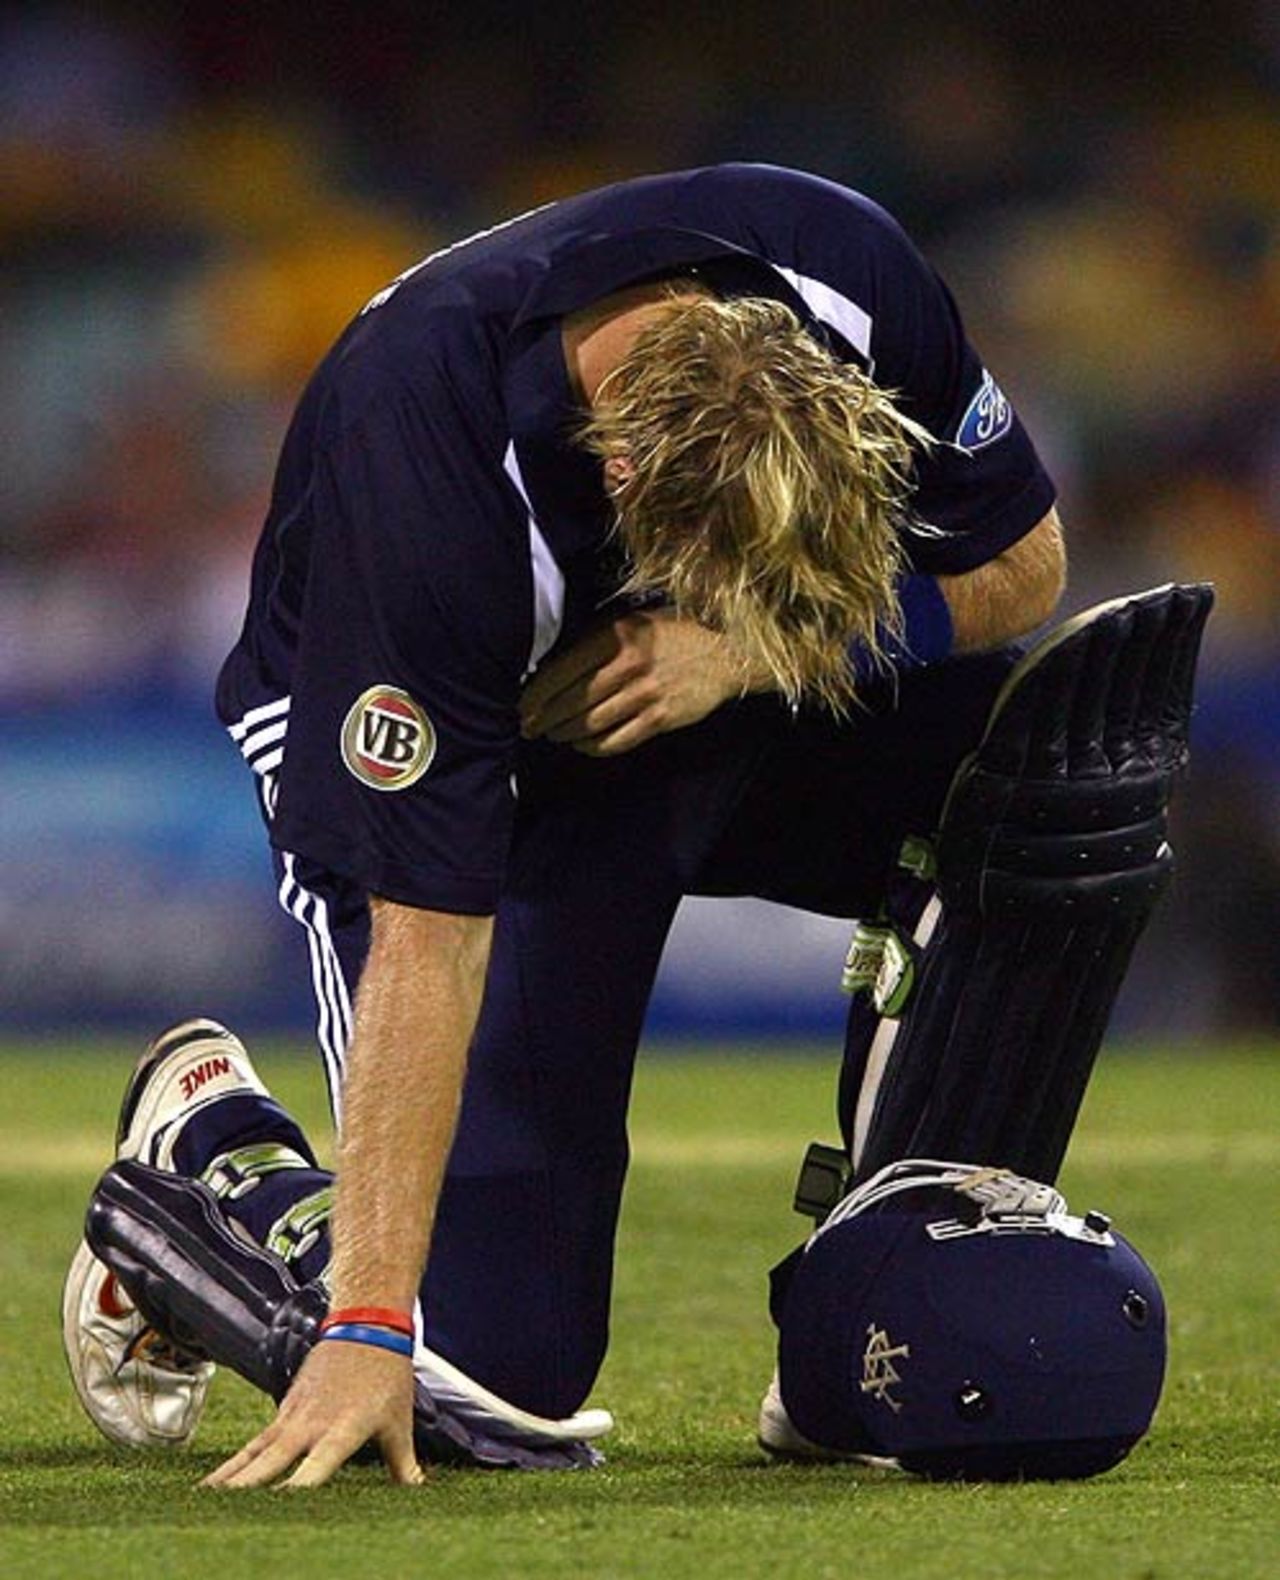 Cameron White crouches in pain after breaking a bone in his foot, Queensland v Victoria, FR Cup, Brisbane, November 23, 2007